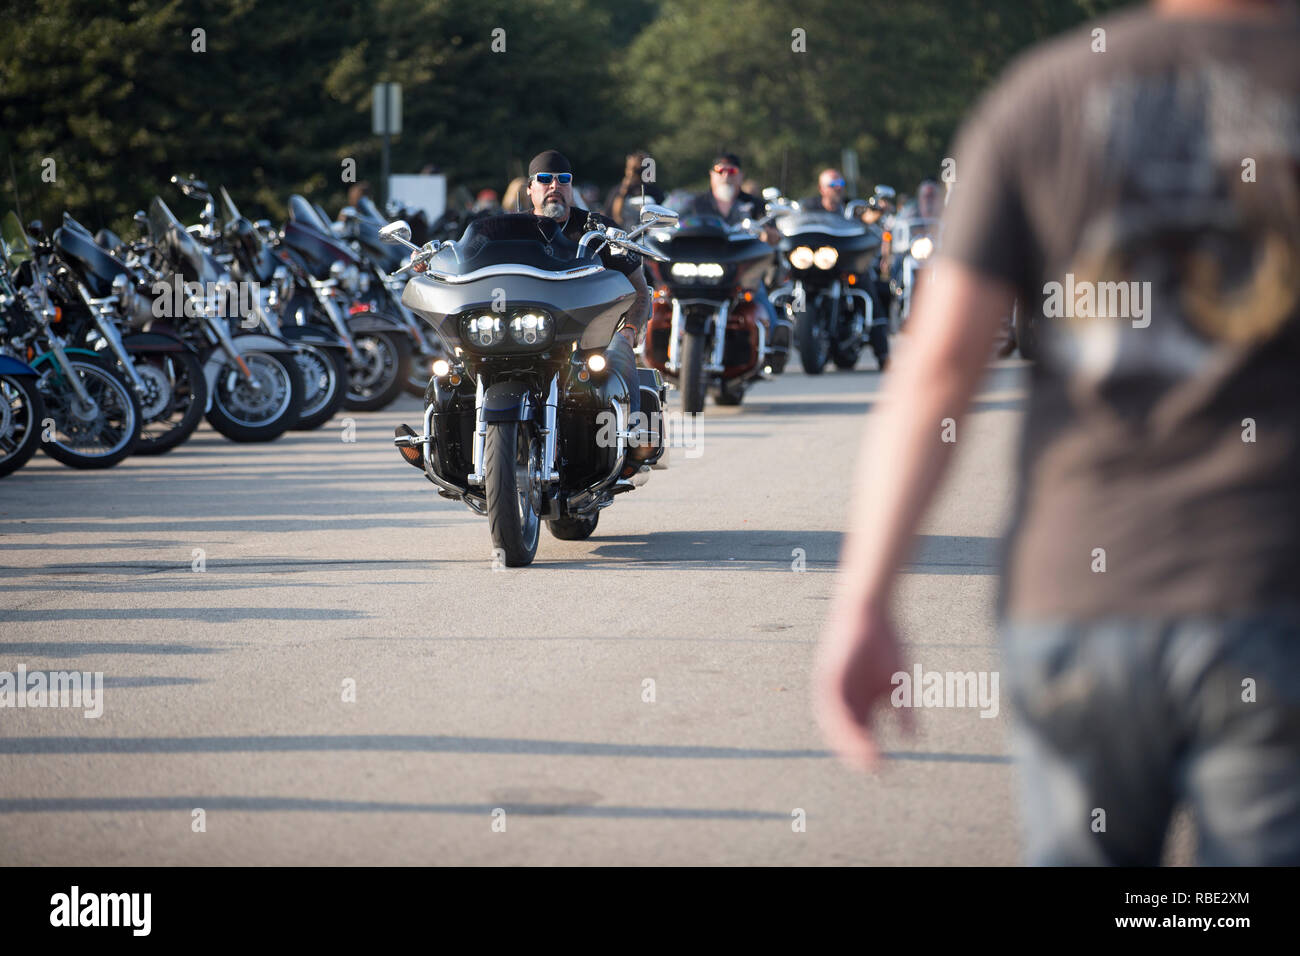 Motorcycle riders from all over the world attend the 115th Harley-Davidson anniversary celebration event in downtown Milwaukee, Wisconsin Stock Photo